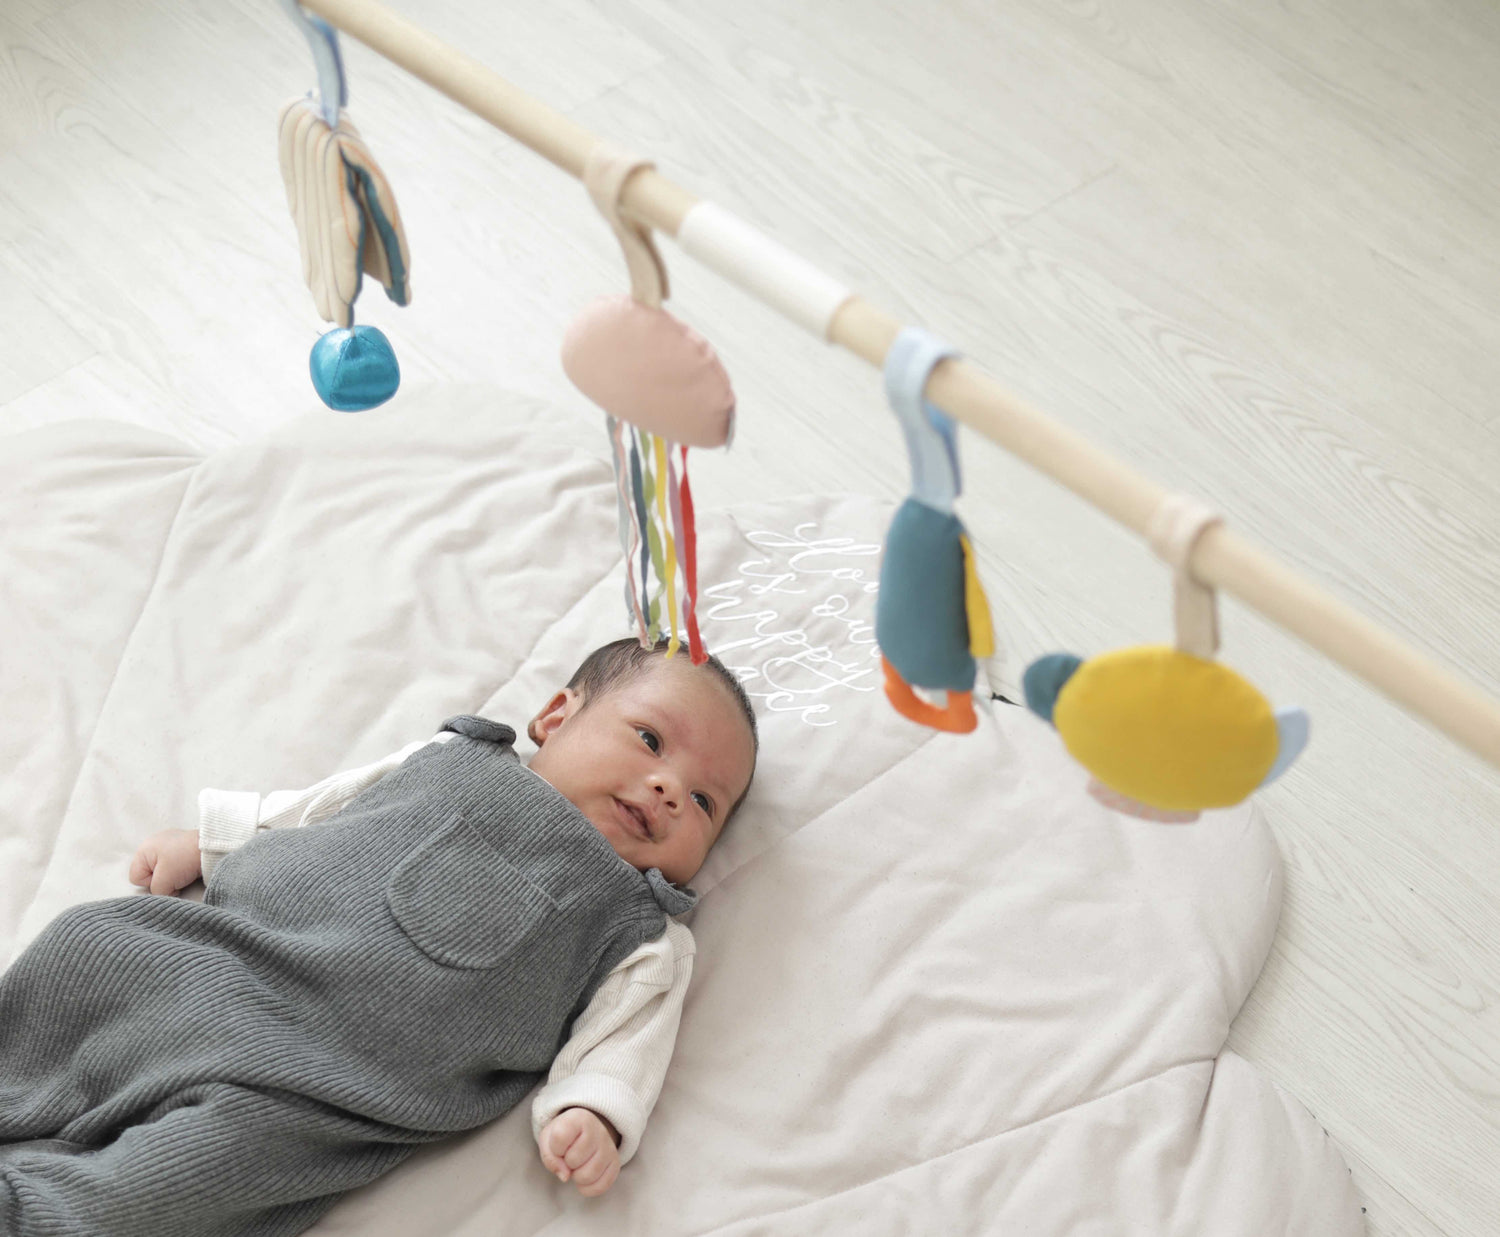 Newborn baby looking at hanging mobile toys